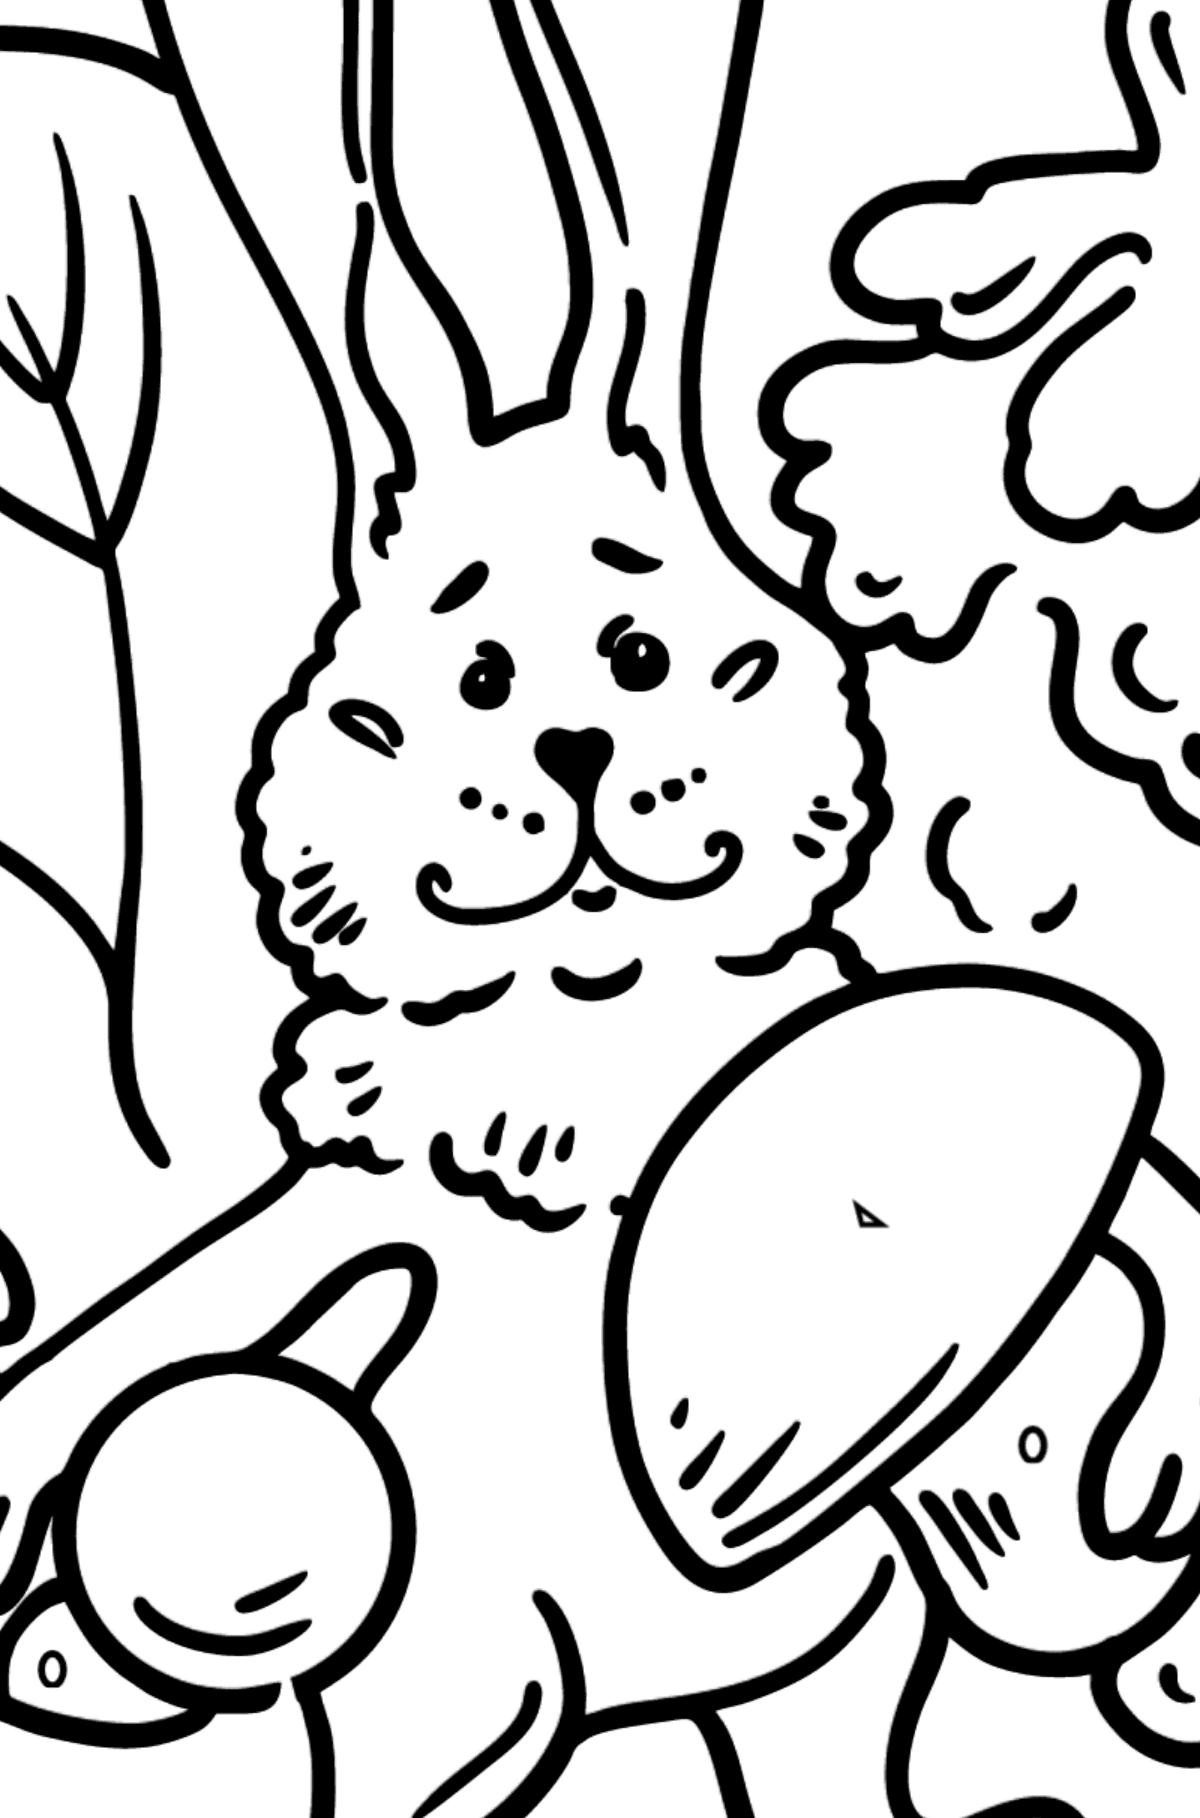 Bunny in the Forest coloring page - Coloring by Geometric Shapes for Kids